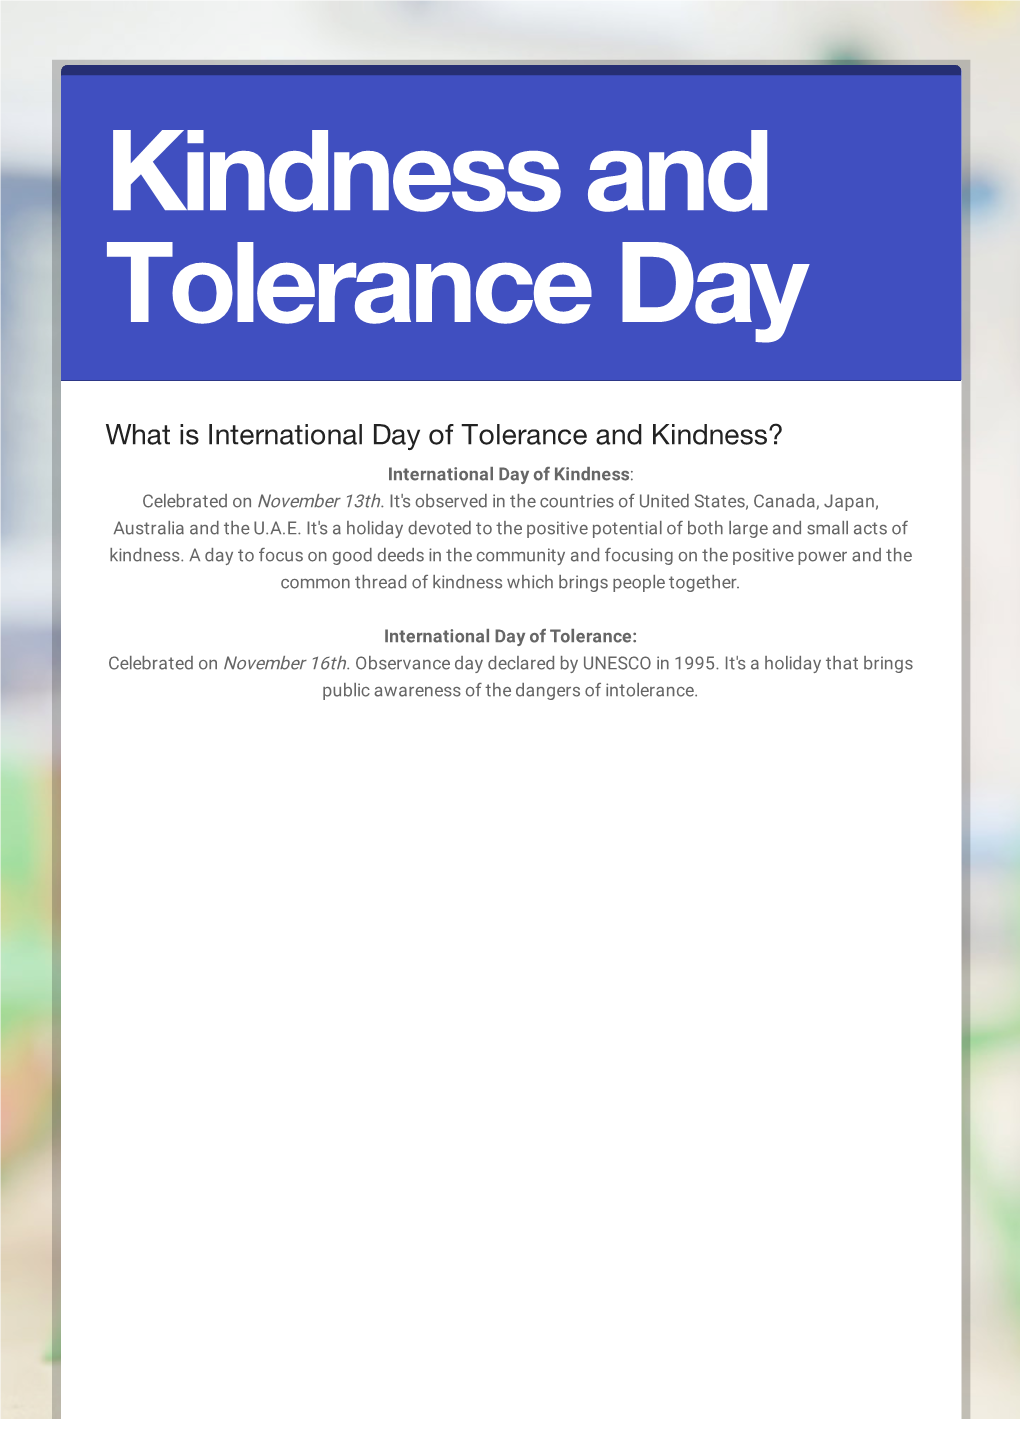 Kindness and Tolerance Day